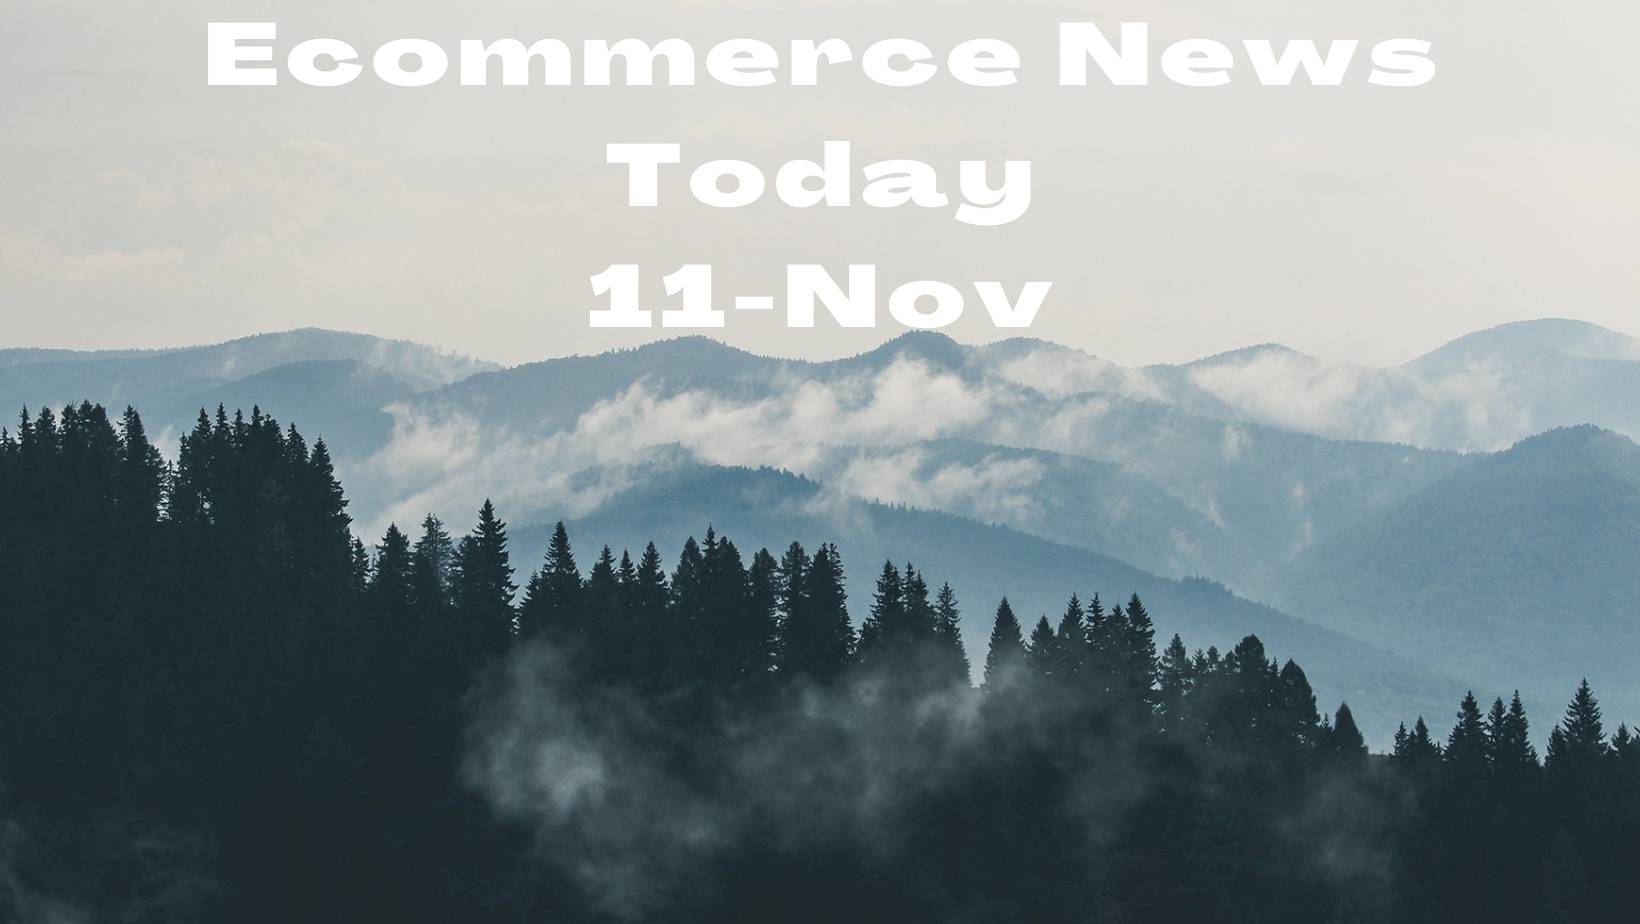 10 Ecommerce News Today-Shopify unveiled Japanese customers' online shopping behaviors